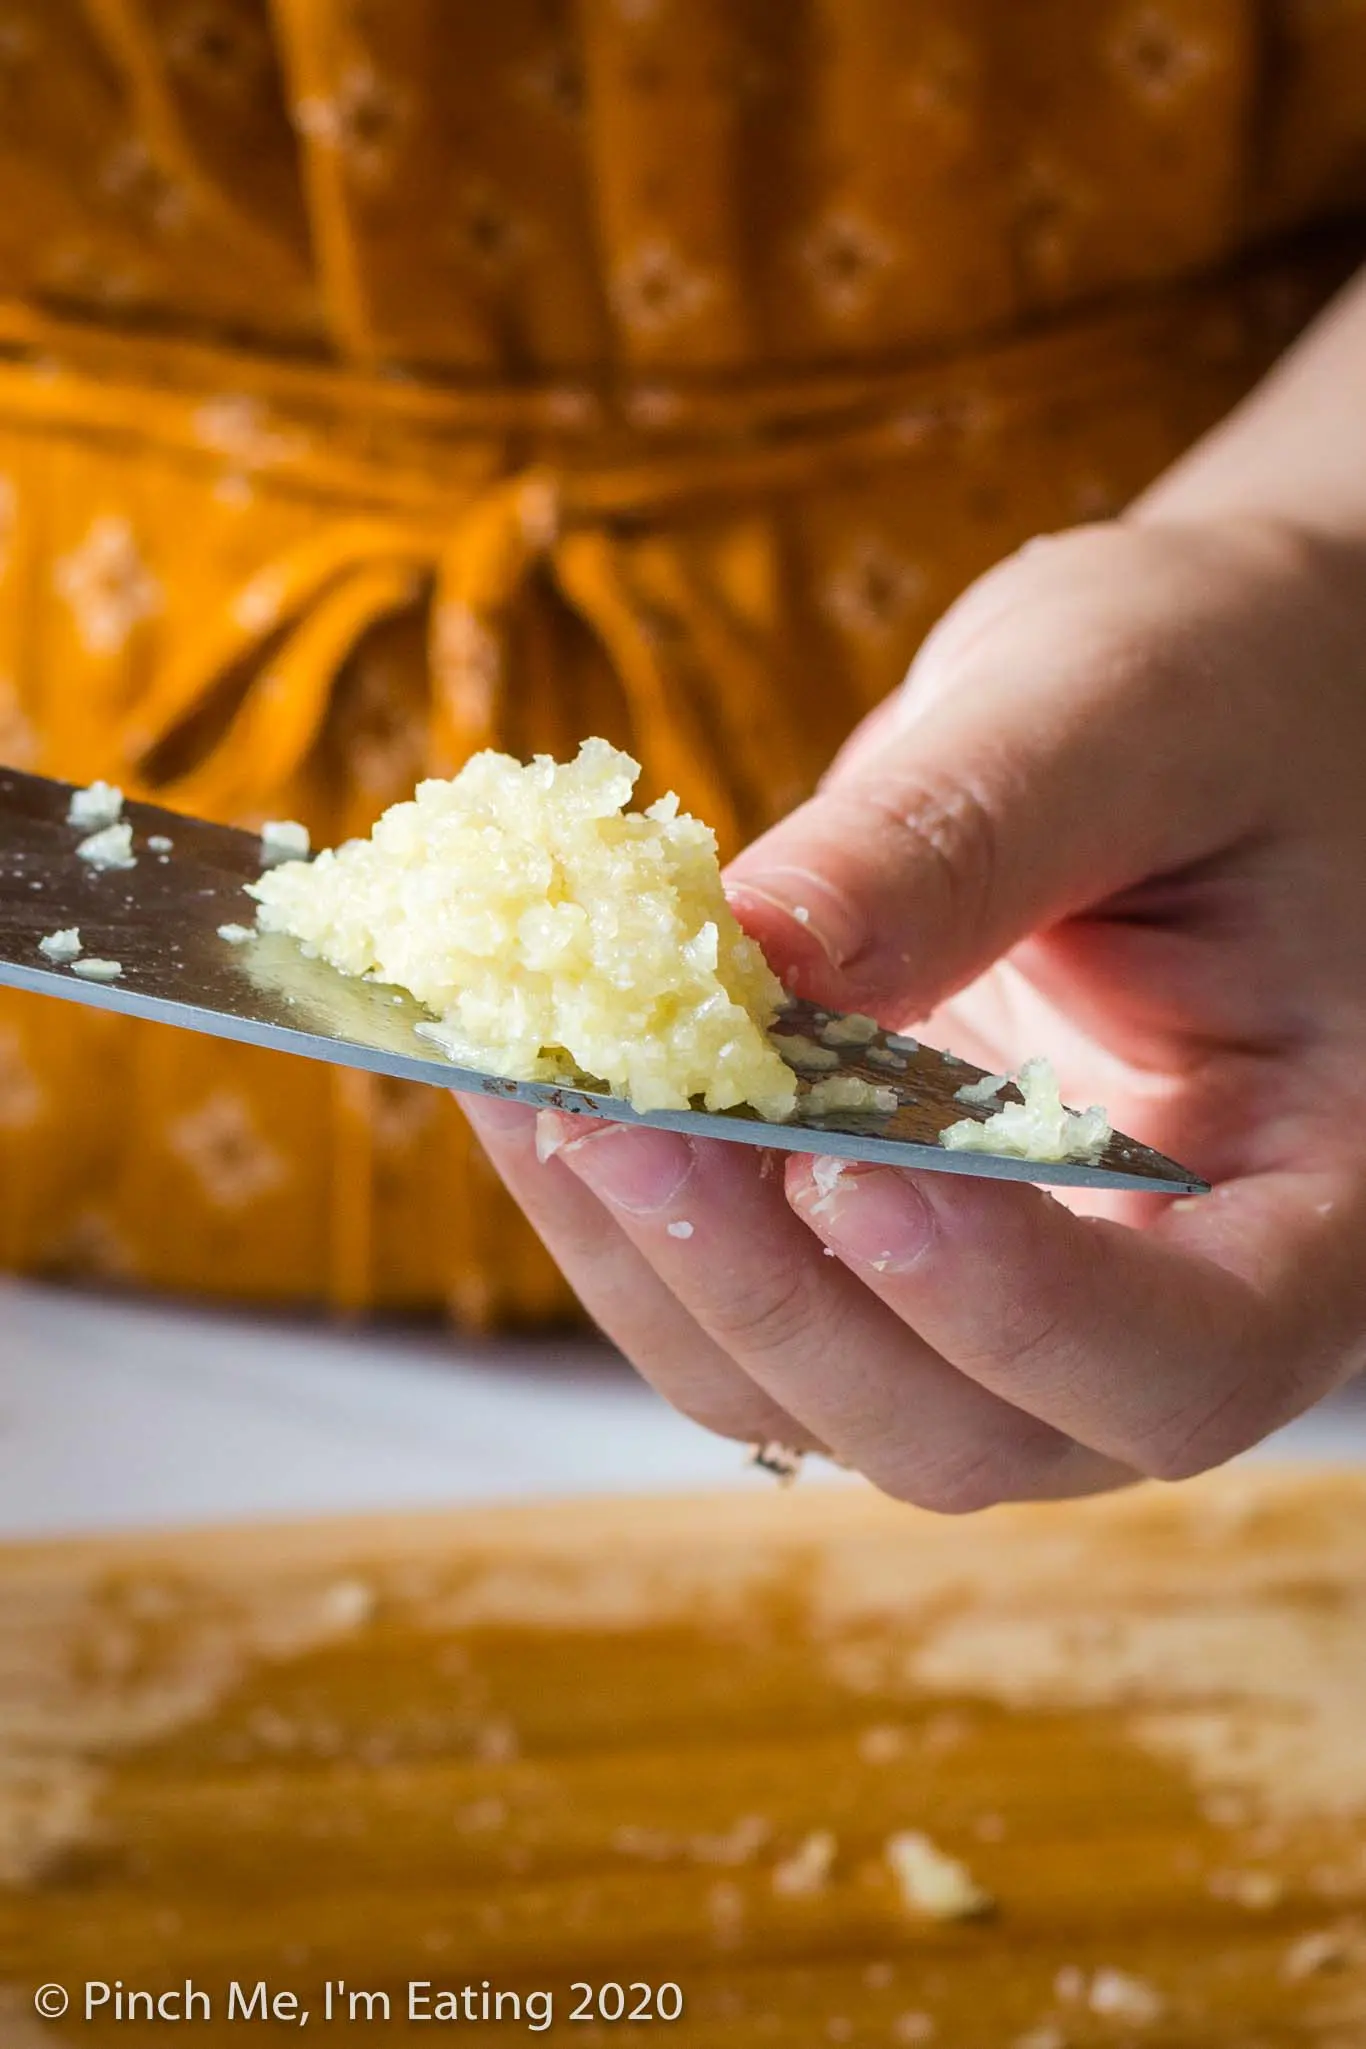 Woman holding garlic paste on the side of a knife.